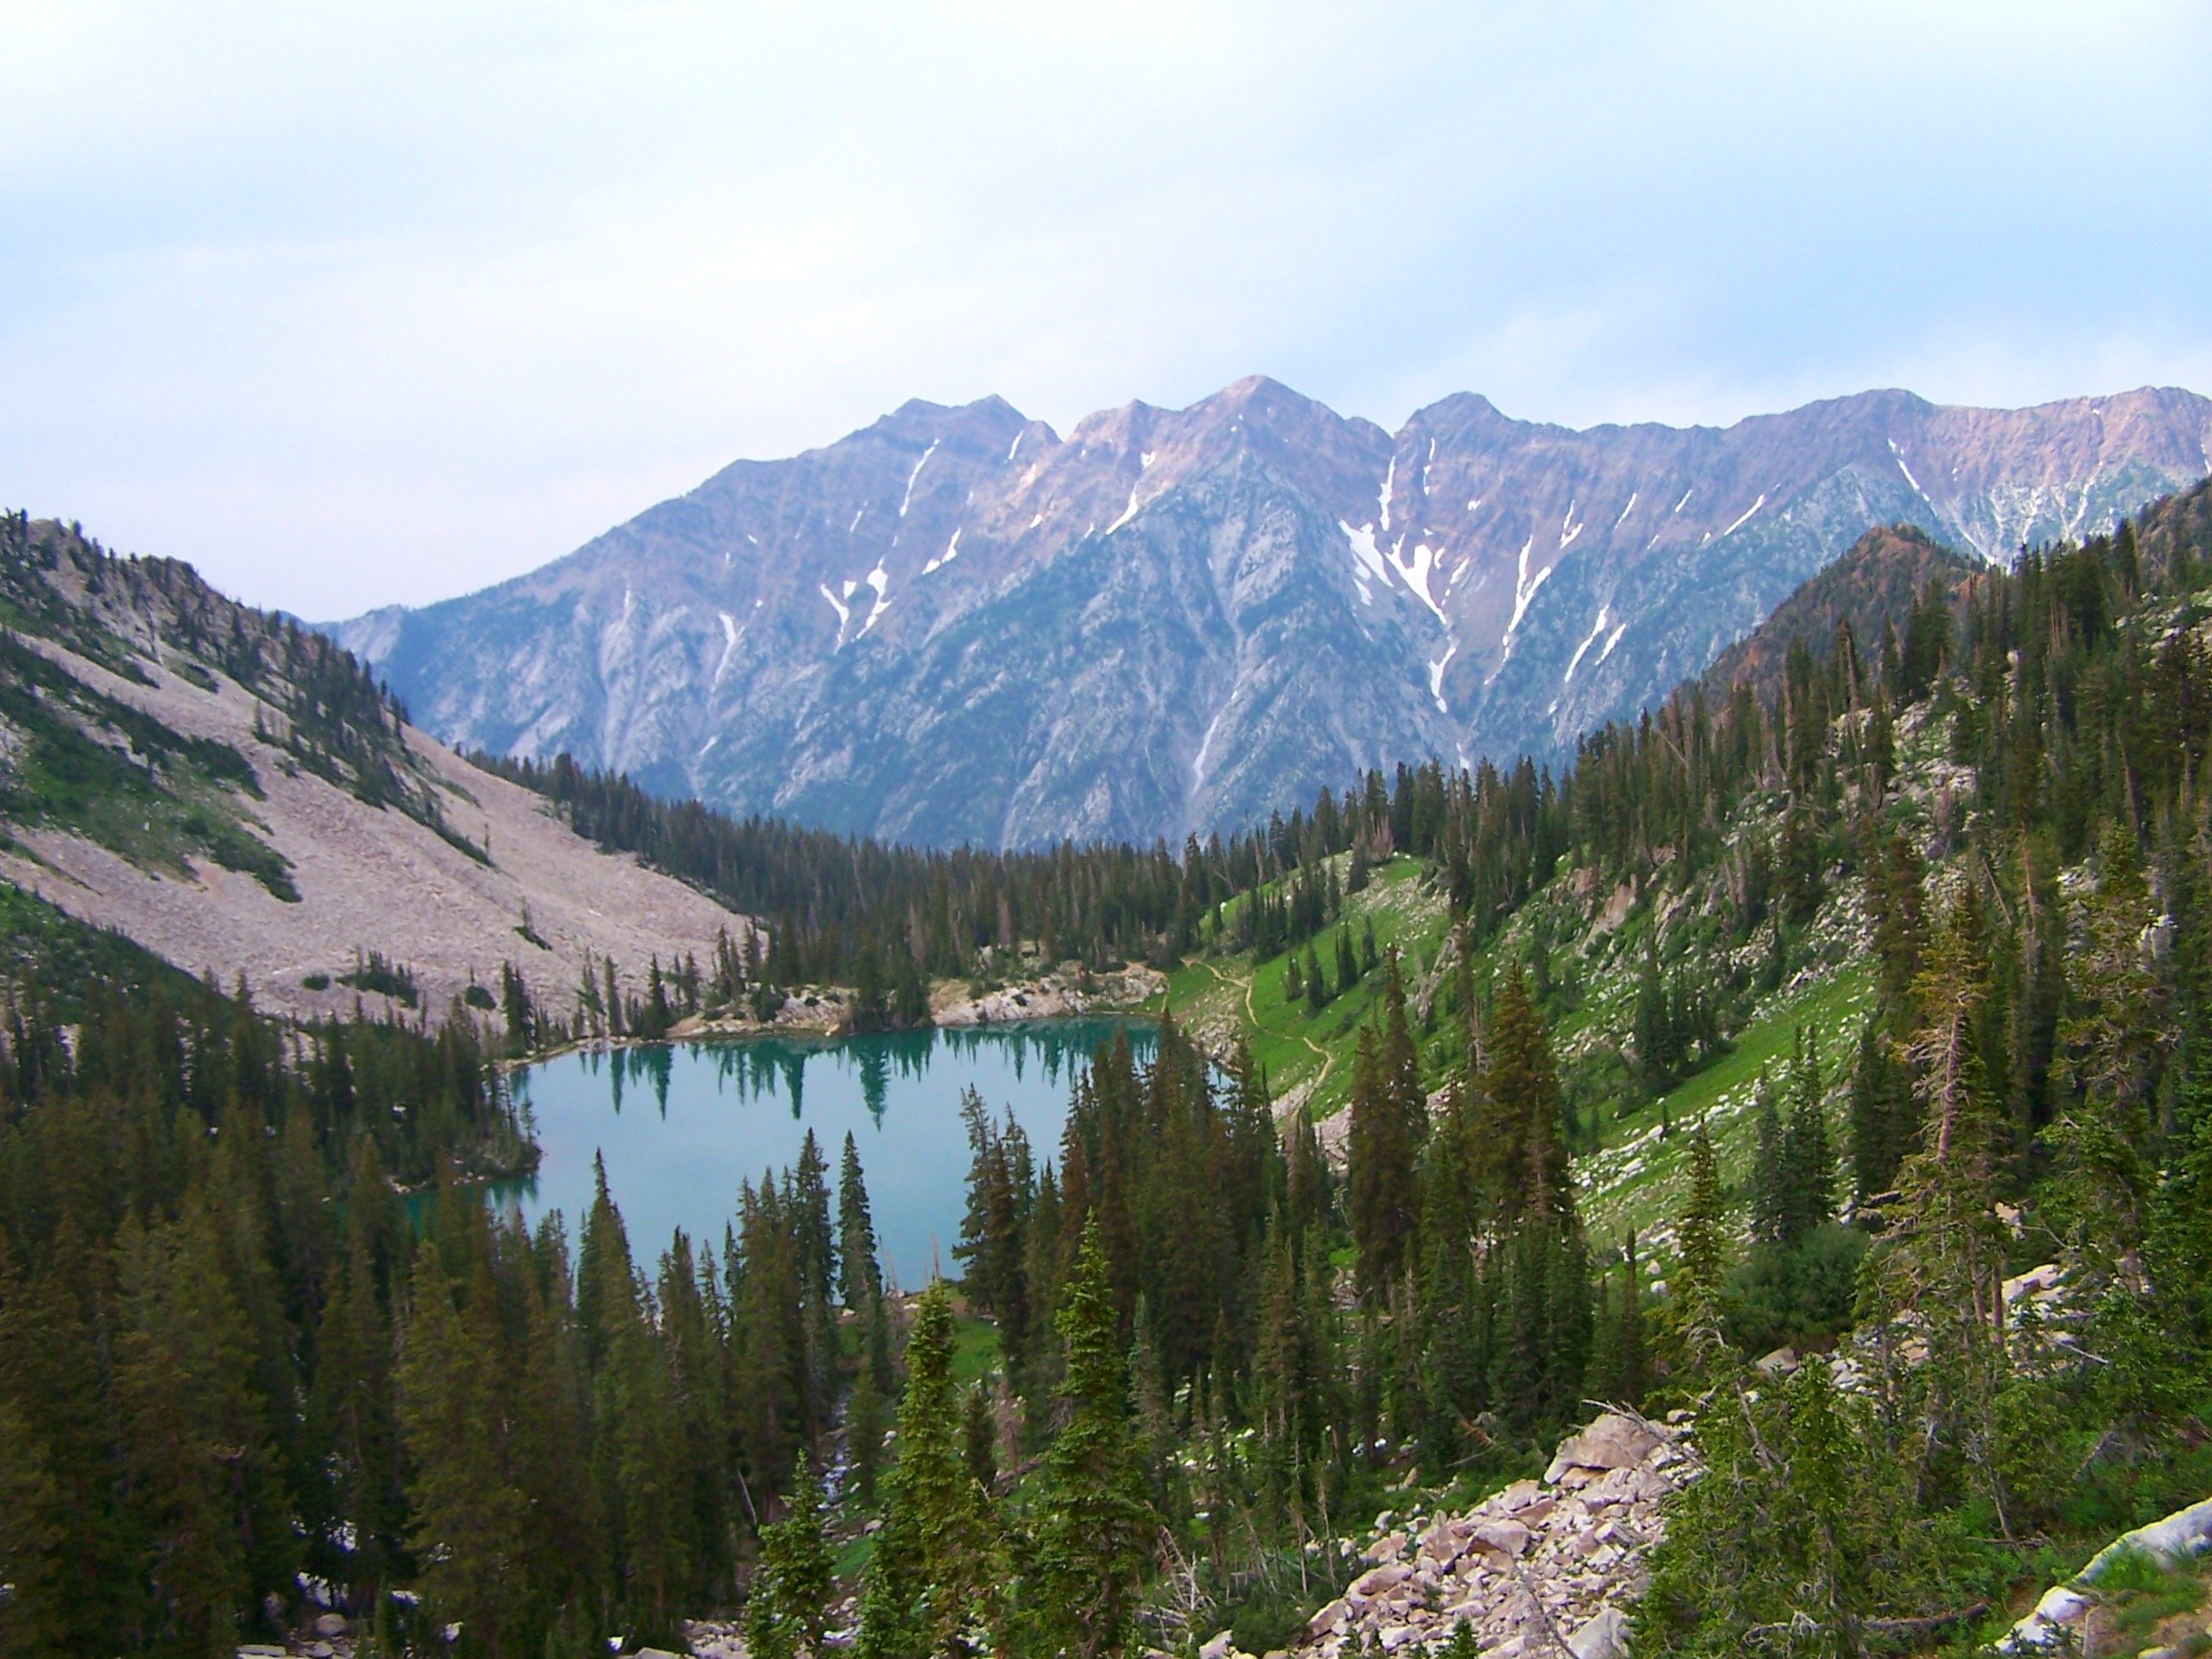 Lower Red-Pine Lake, with Broads Fork Twin Peaks in the background